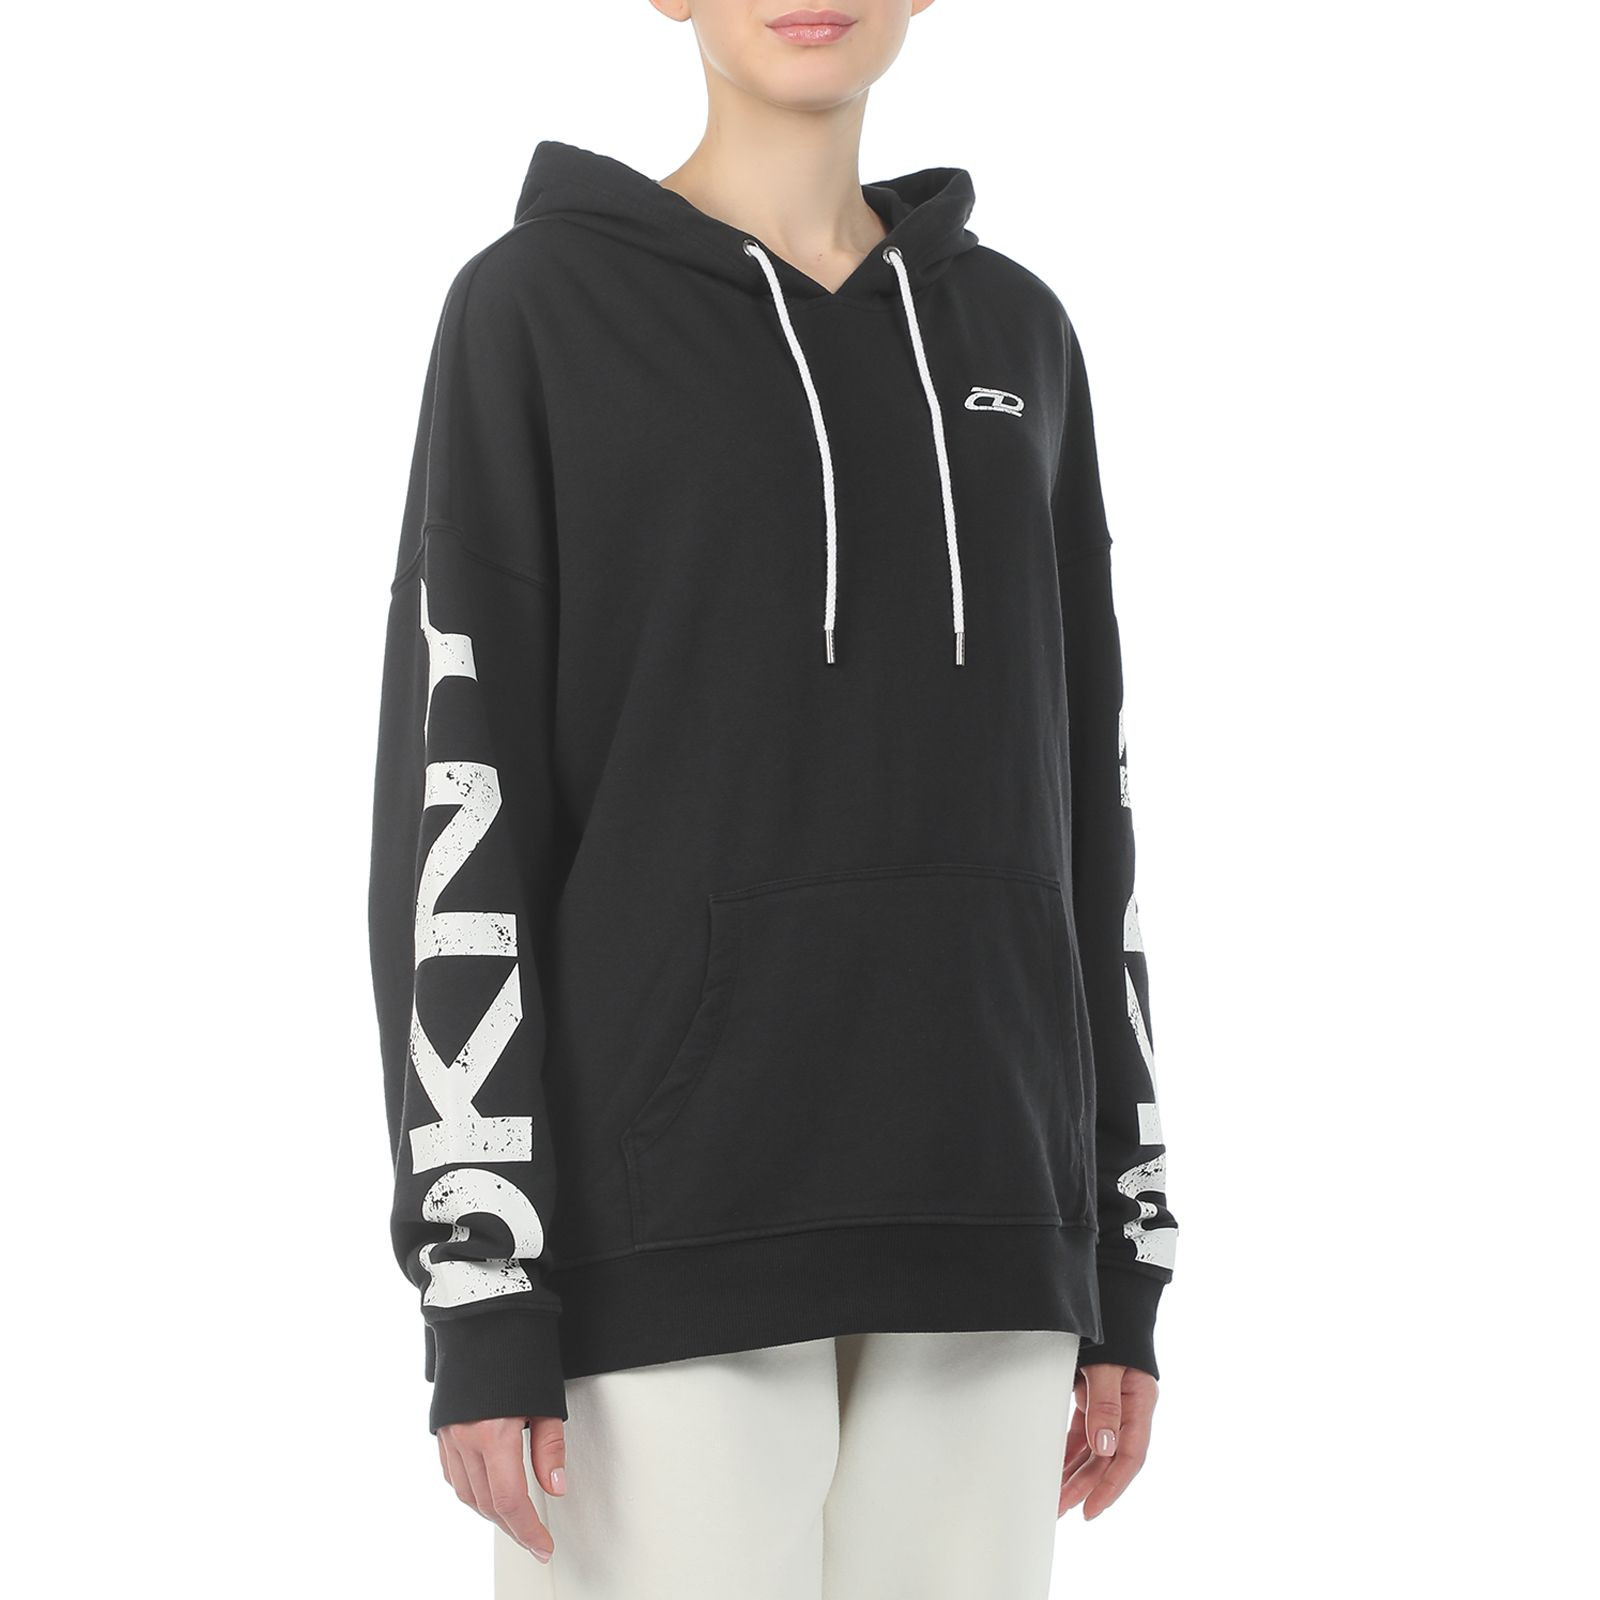 Dkny Pigment Dye Distressed Logo Hoodie Relaxed Fit - Black / DP1T8461 - Size S